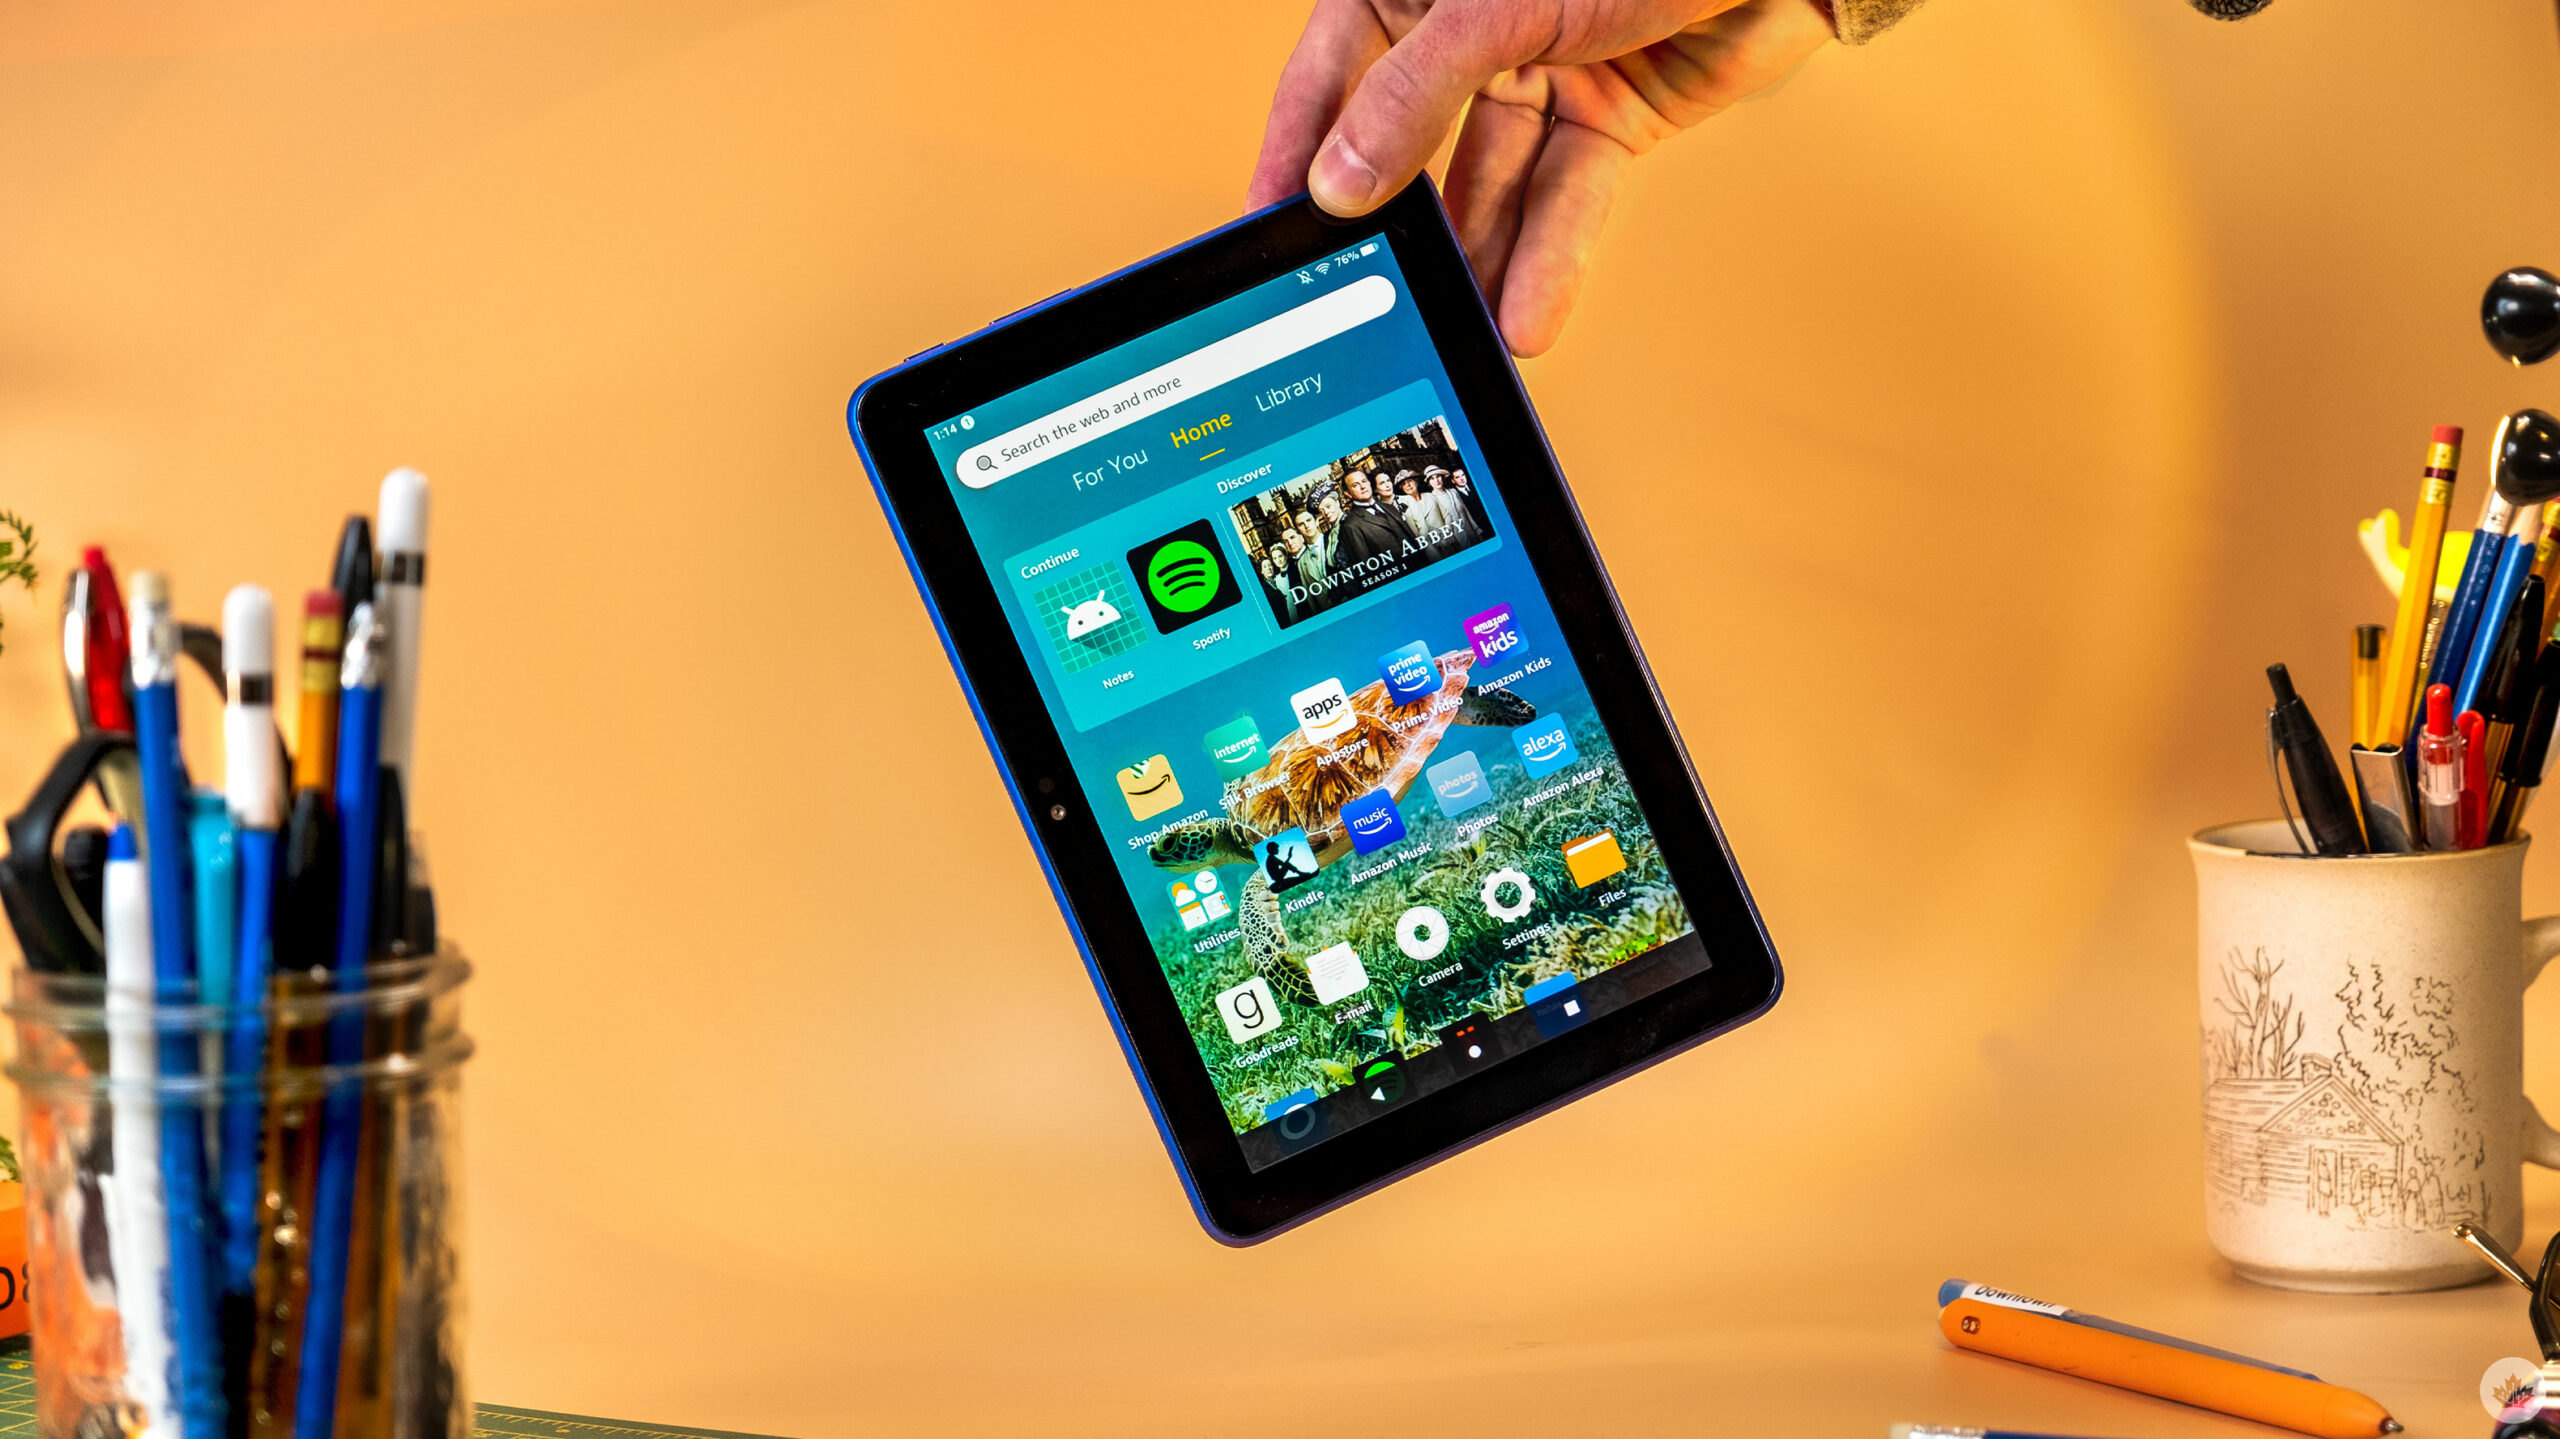 s Fire HD 8 tablet is too slow for 2022